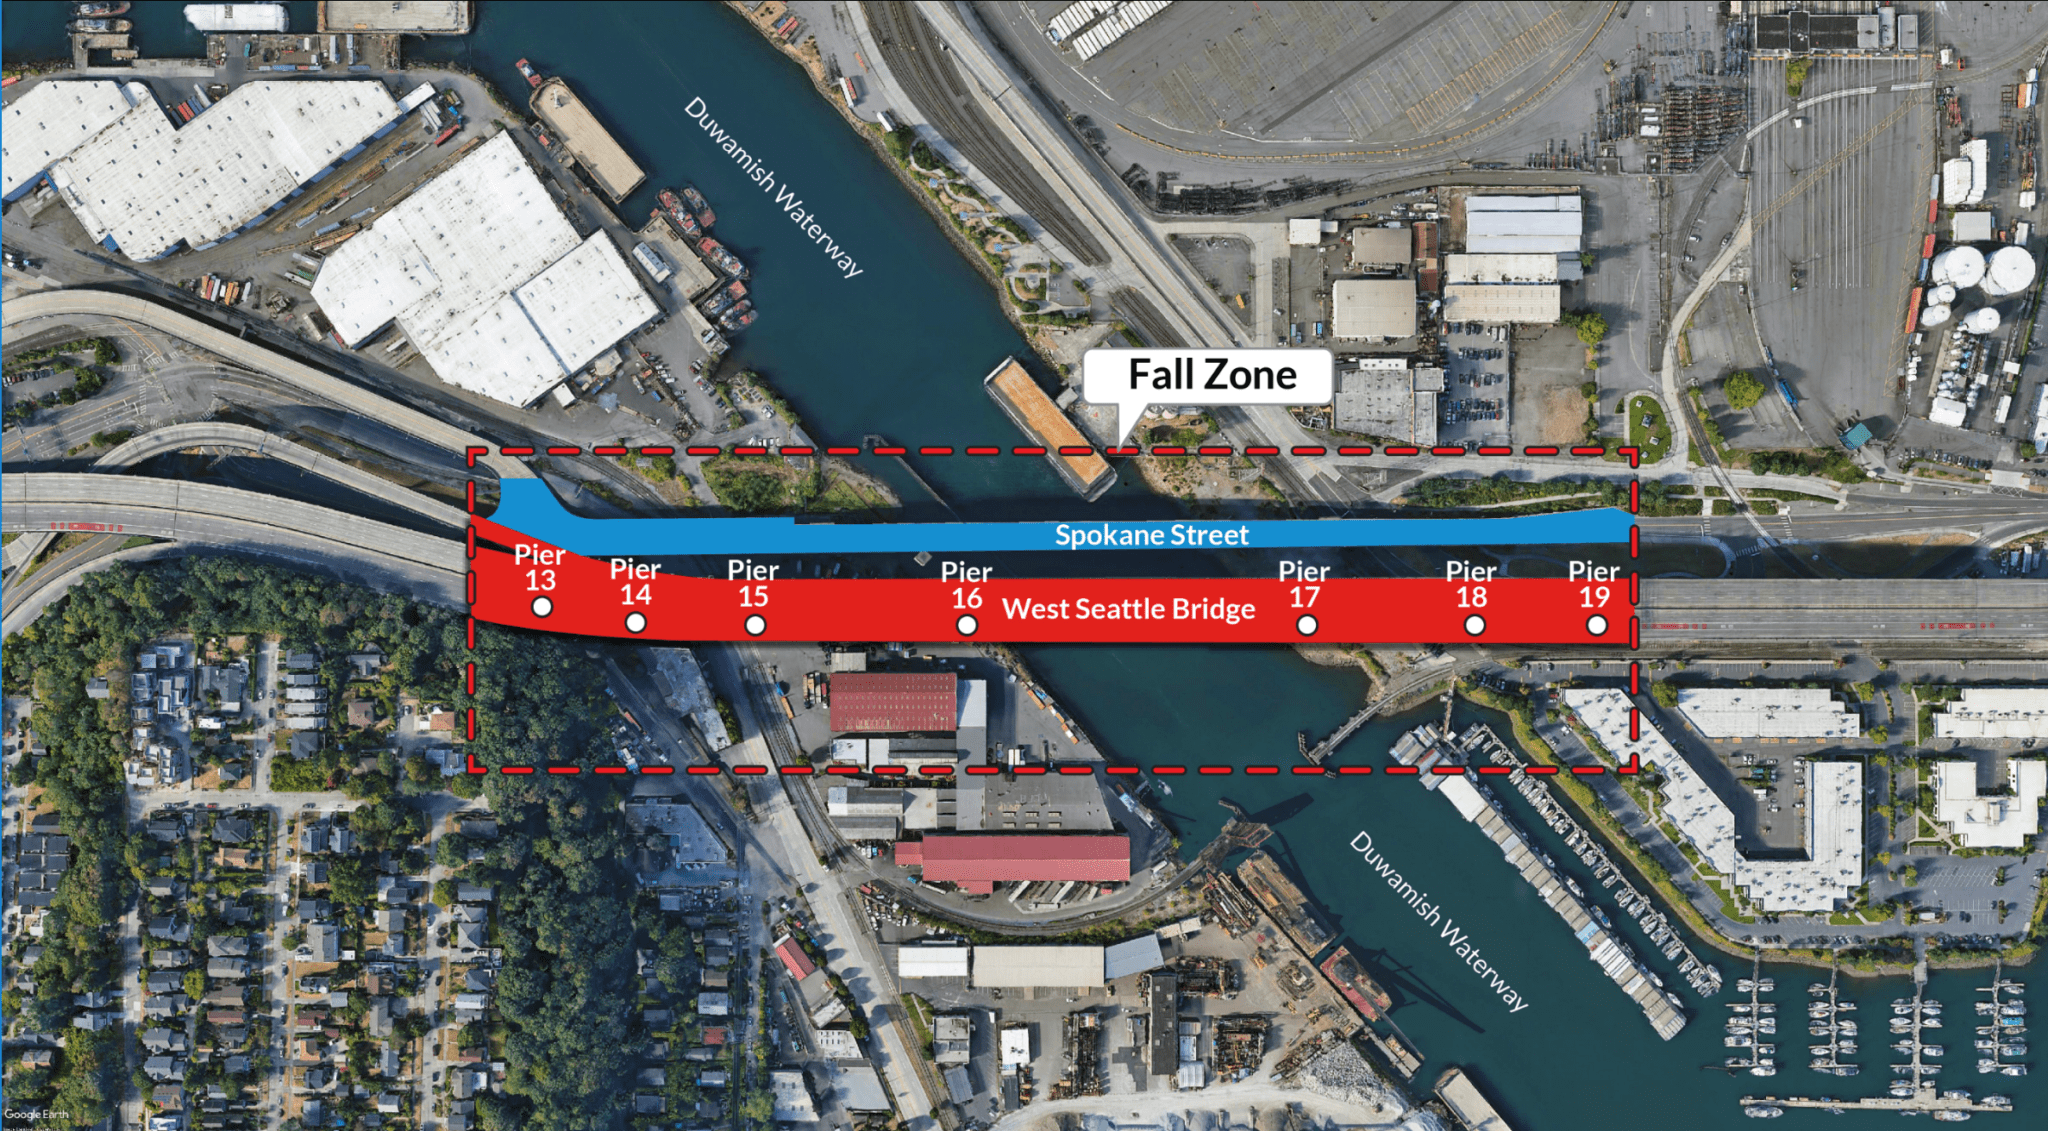 Emergency evacuation Fall Zone which is the only area where debris from the high-rise bridge could drop. 